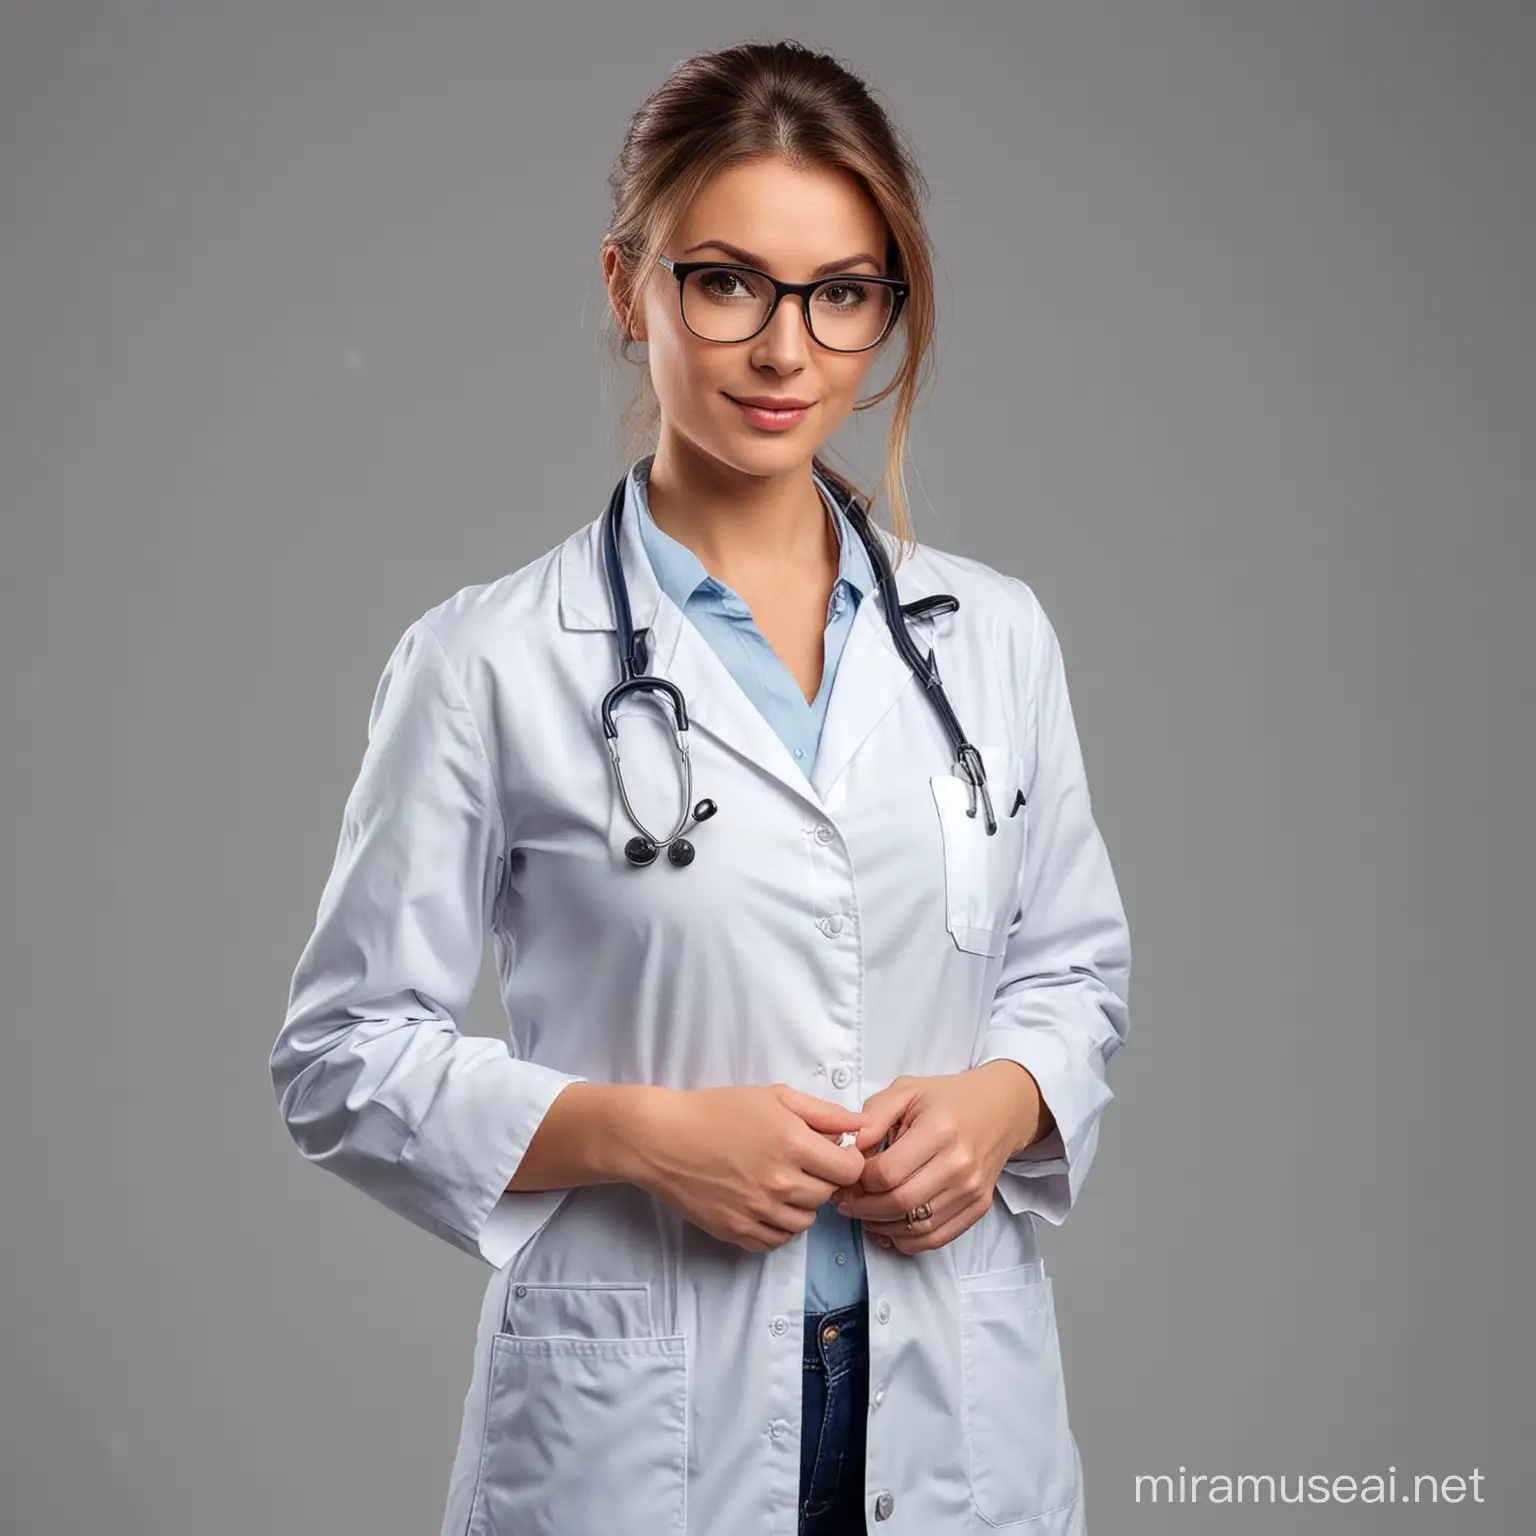 A Beautiful female doctor in glasses. her hands are in her pocket. The background is an isolated background